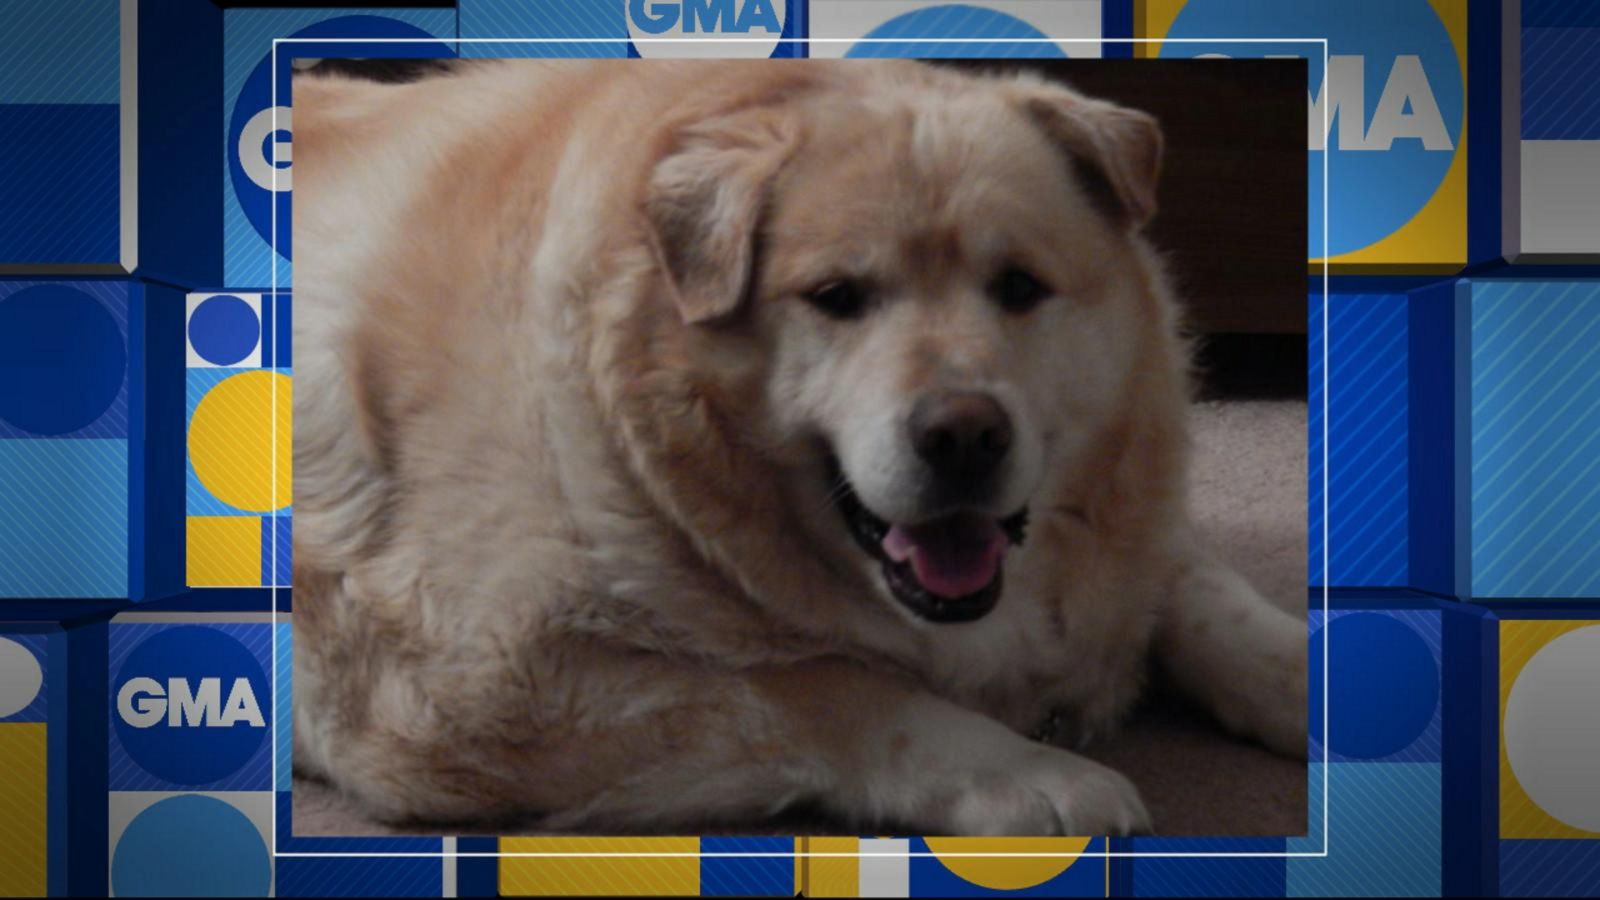 VIDEO: Meet the golden retriever who lost 100 pounds